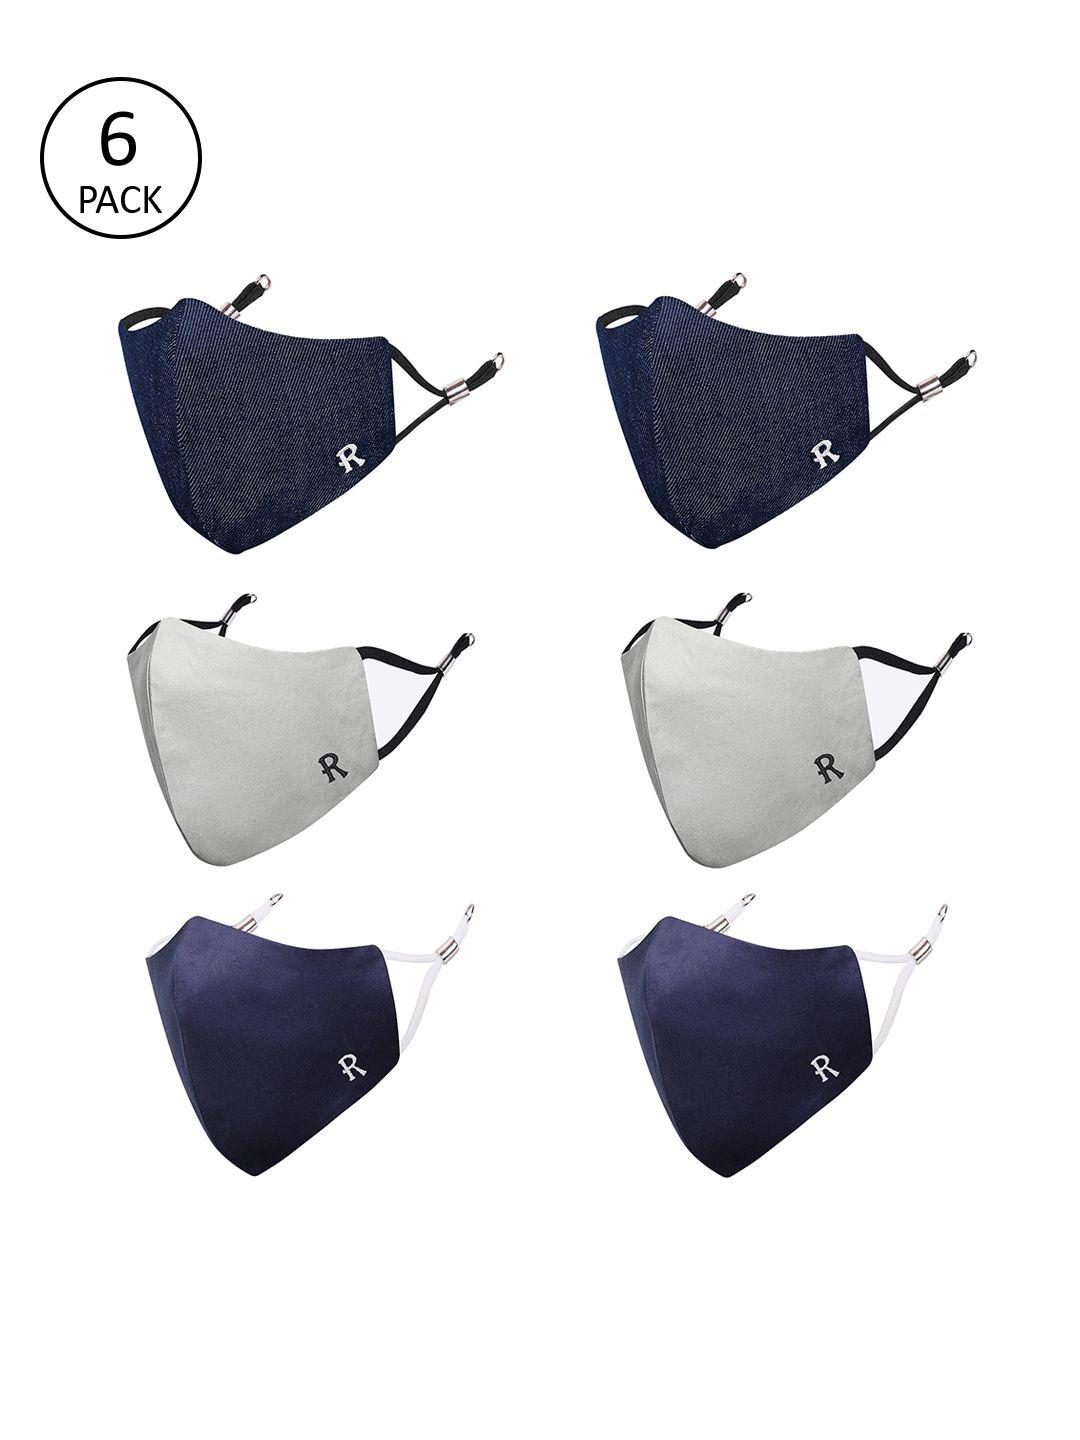 masq pack of 6 navy blue & grey 4-ply pure cotton reusable cloth masks